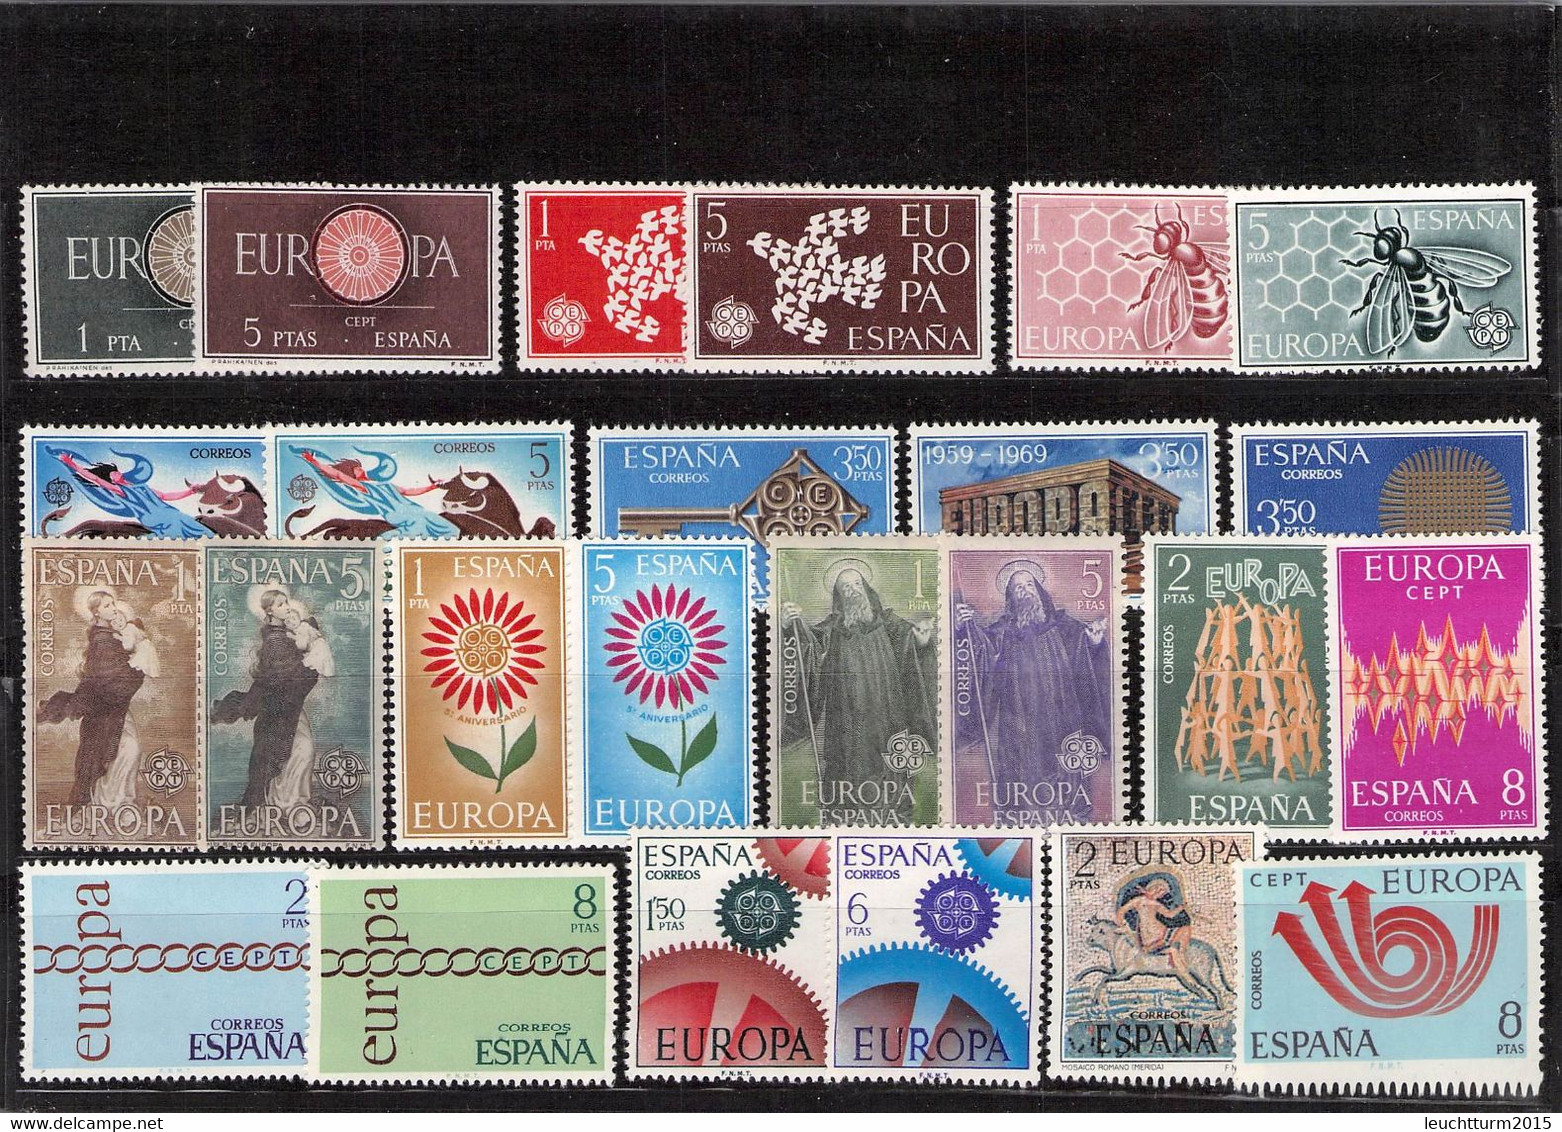 SPAIN - COLLECTION 1960-1973 EUROPA MNH / QE157 - Collections